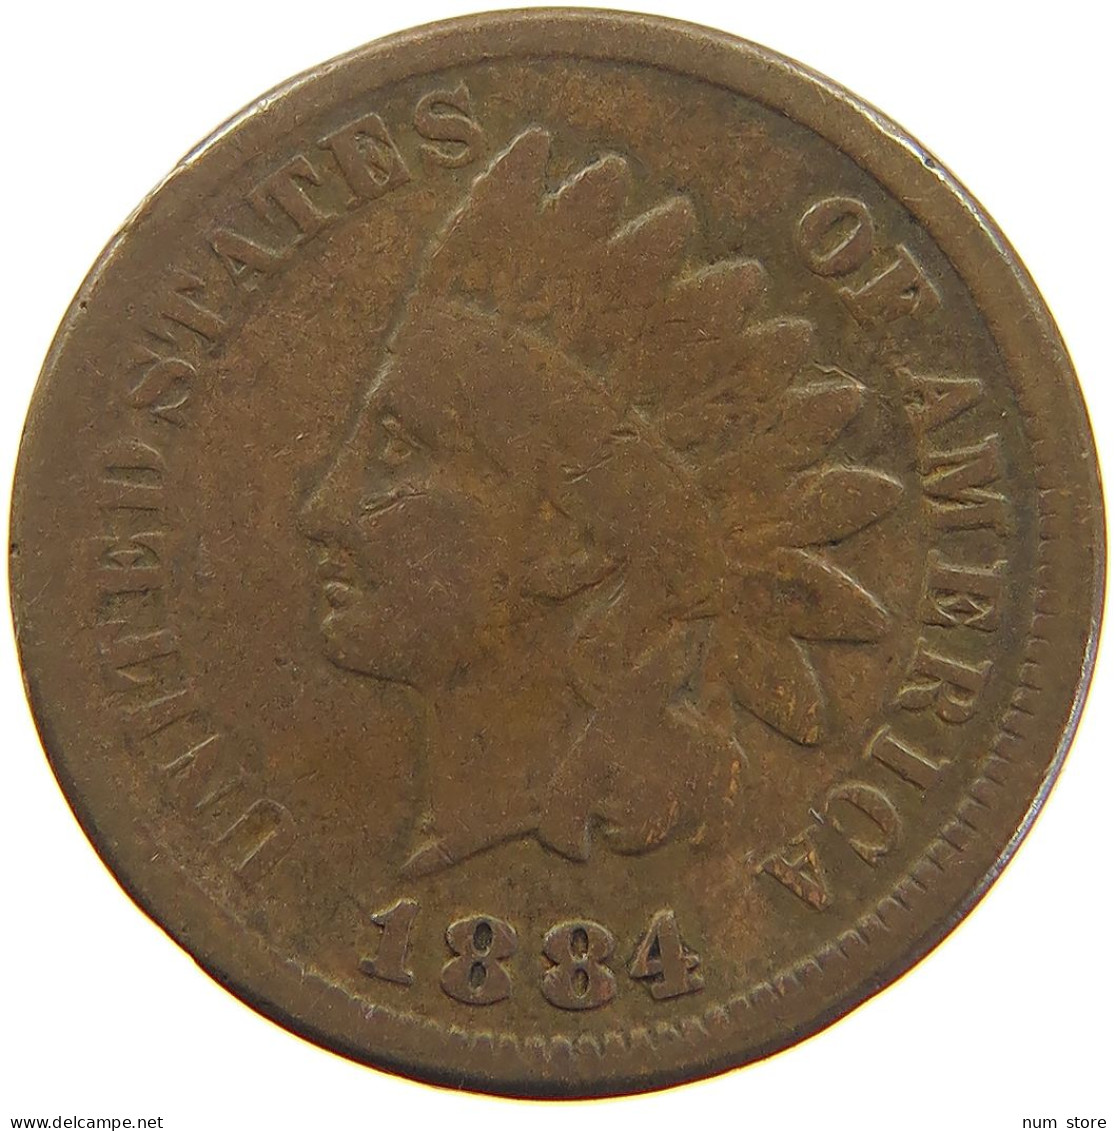 UNITED STATES OF AMERICA CENT 1884 INDIAN HEAD #c083 0661 - 1859-1909: Indian Head